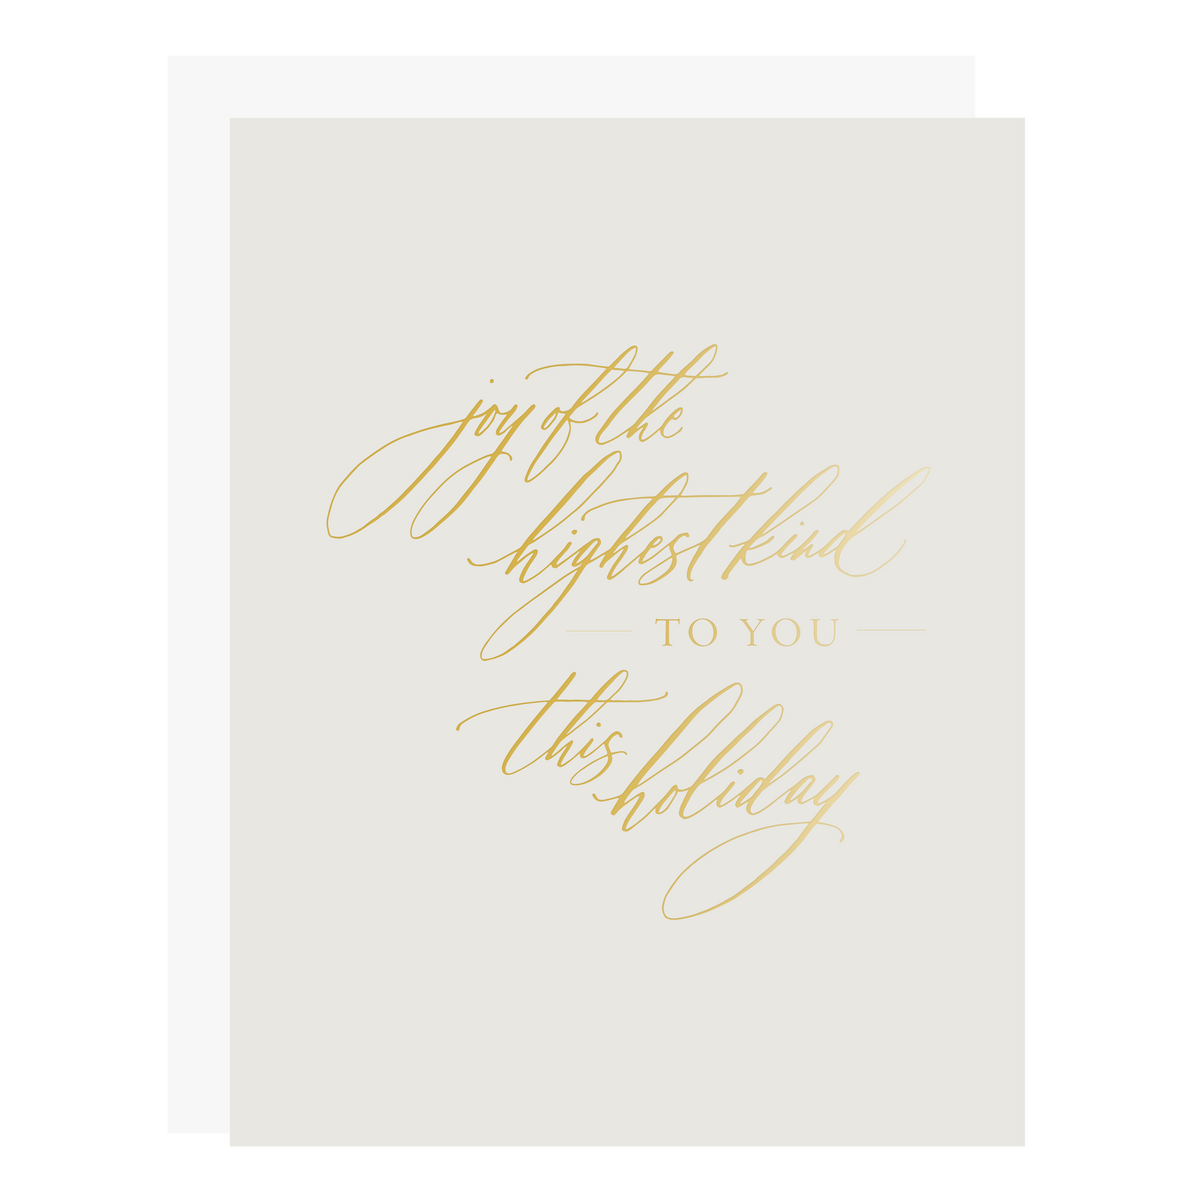 &quot;Joy of the Highest Kind&quot; card, letterpress printed by hand in gold foil. 